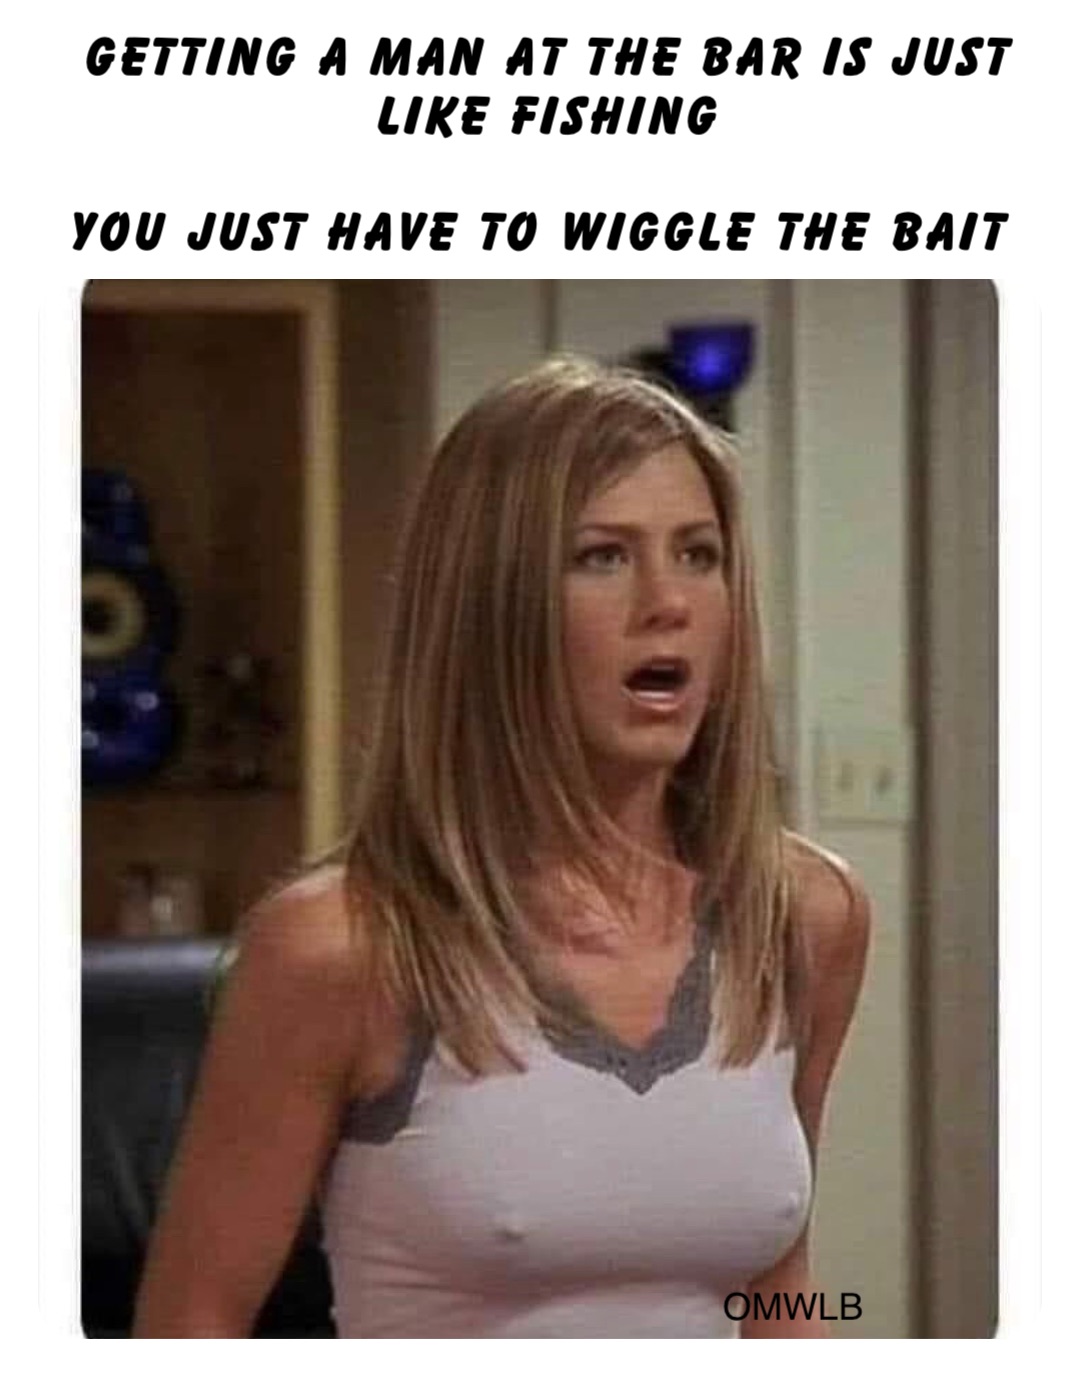 Getting a man at the bar is just like fishing 

you just have to wiggle the bait OMWLB